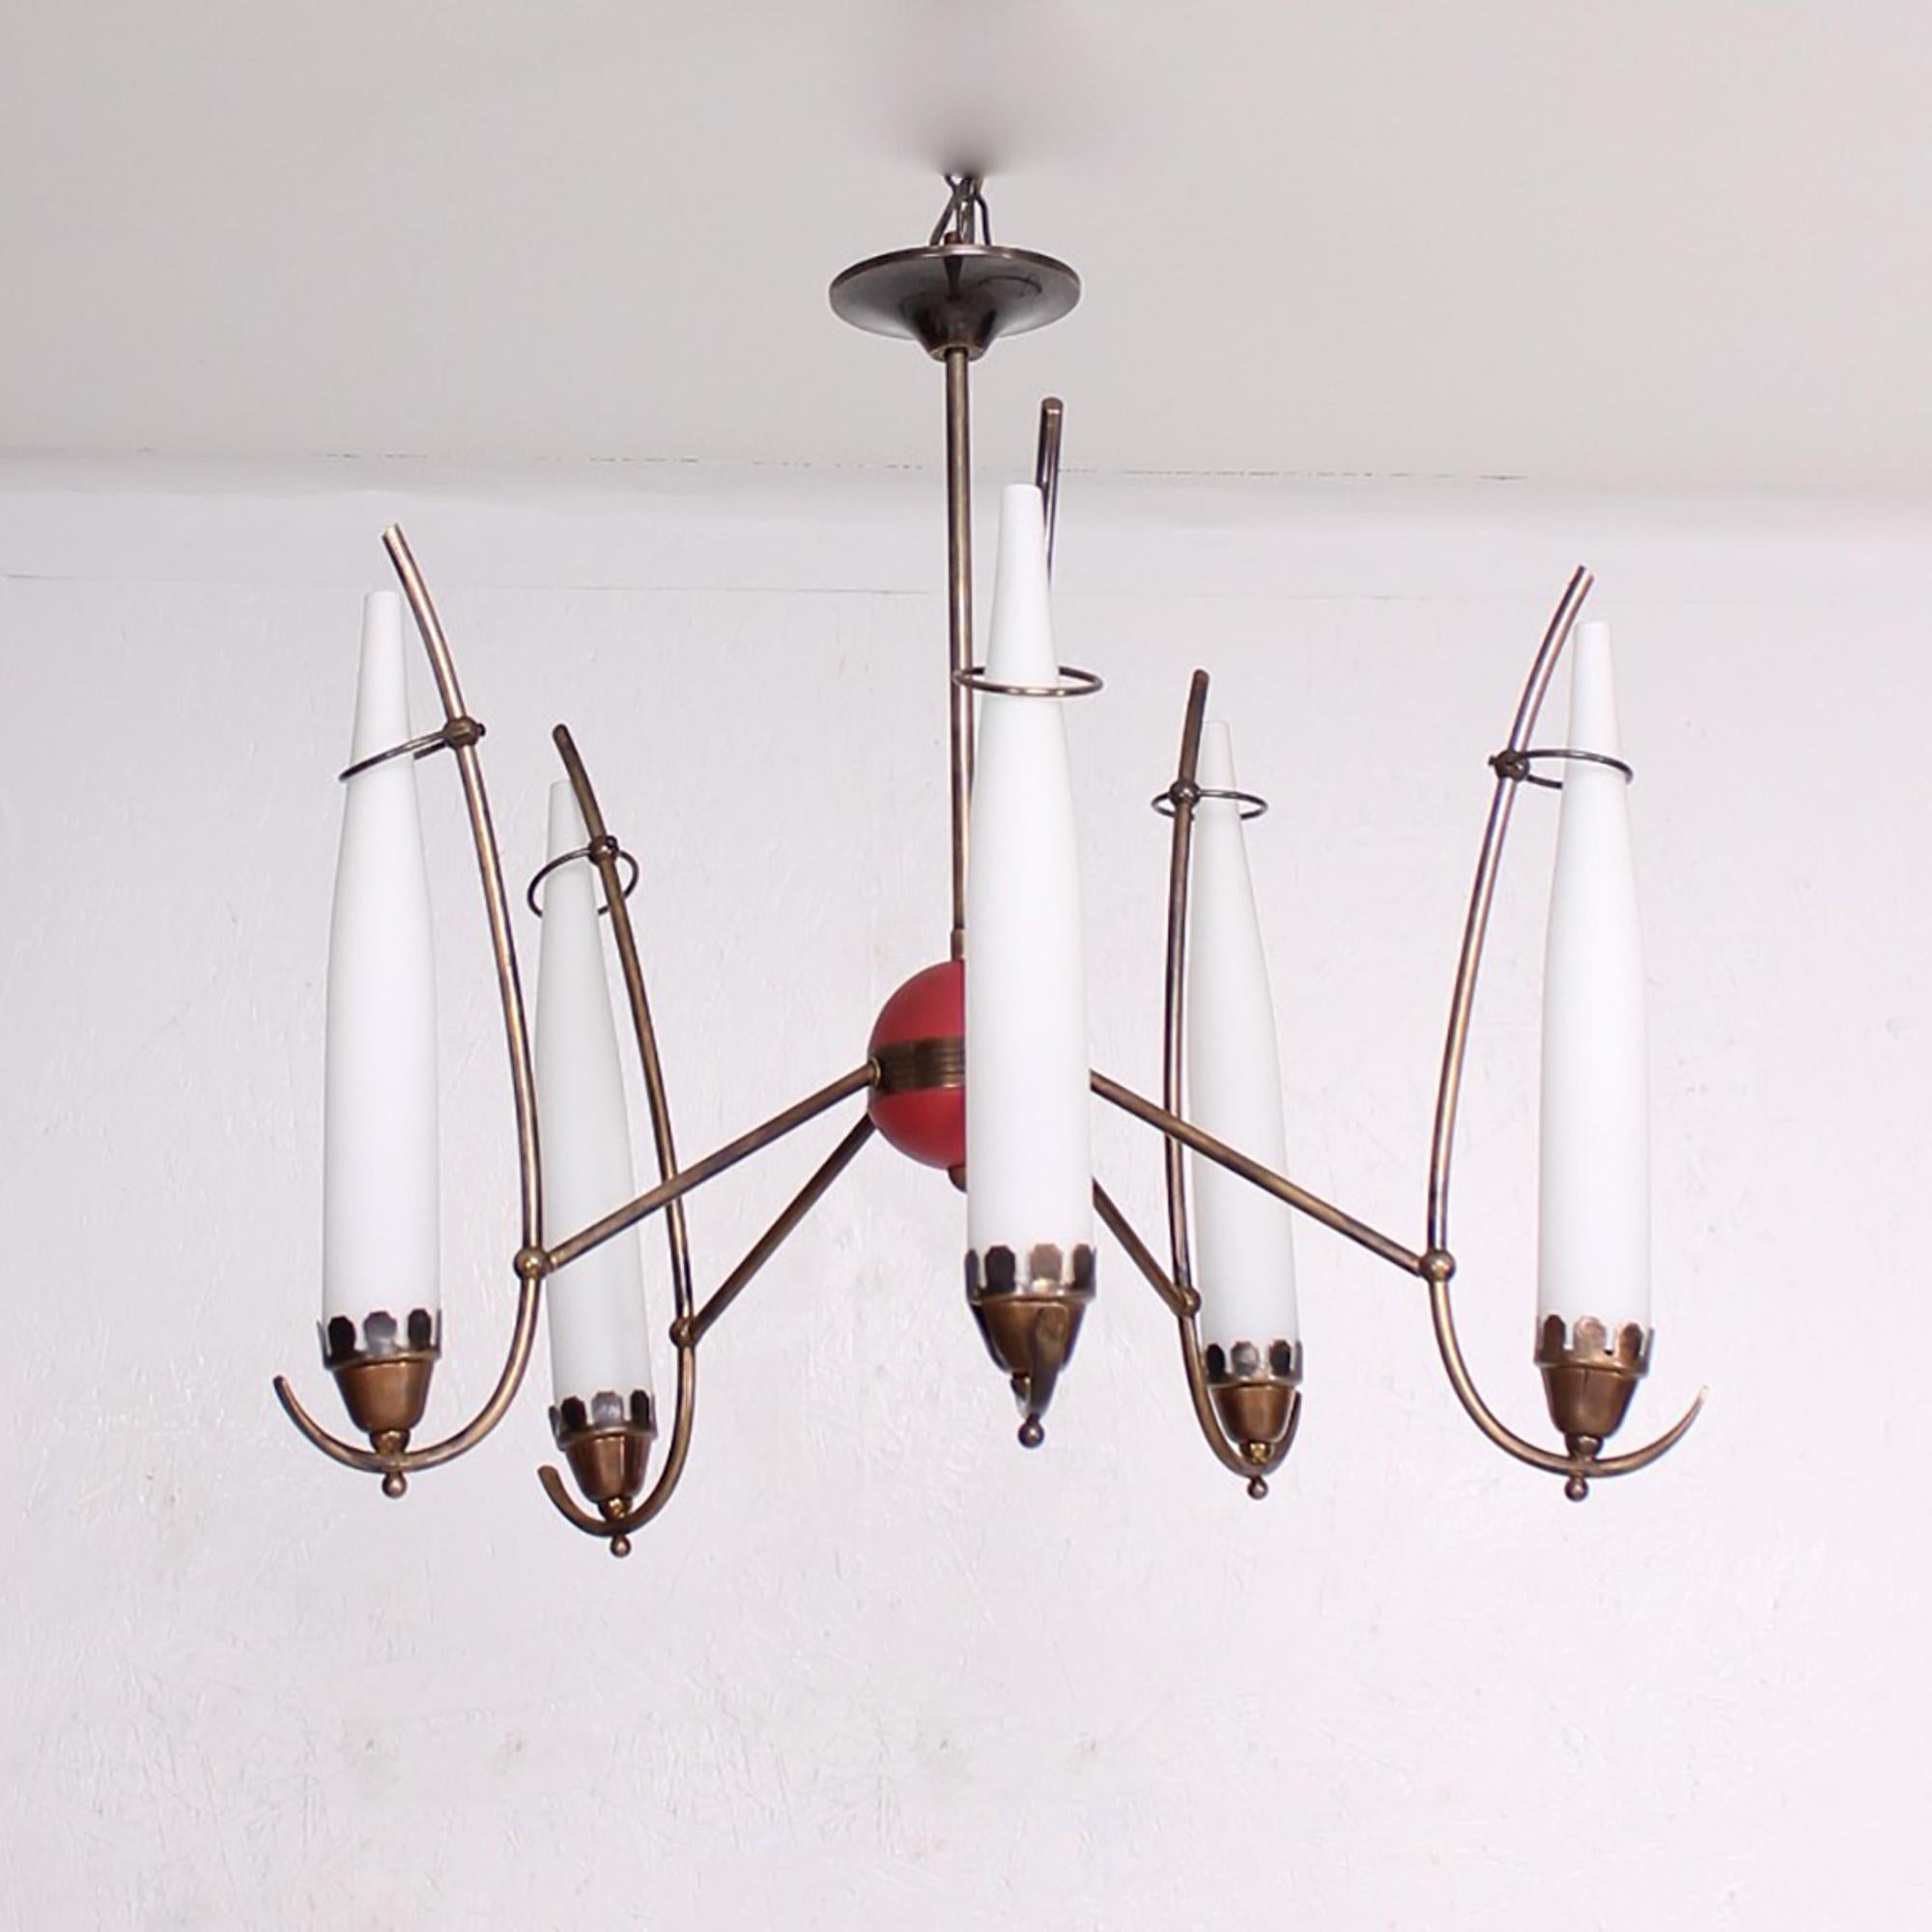 Chandelier
1950s Italian Brass Chandelier constructed with sculptural aluminum arms aluminum hardware painted red.
There are five handmade tapered opaline case glass shades in white satin. 
Unmarked, attributed to STILNOVO Italy
It requires five E14